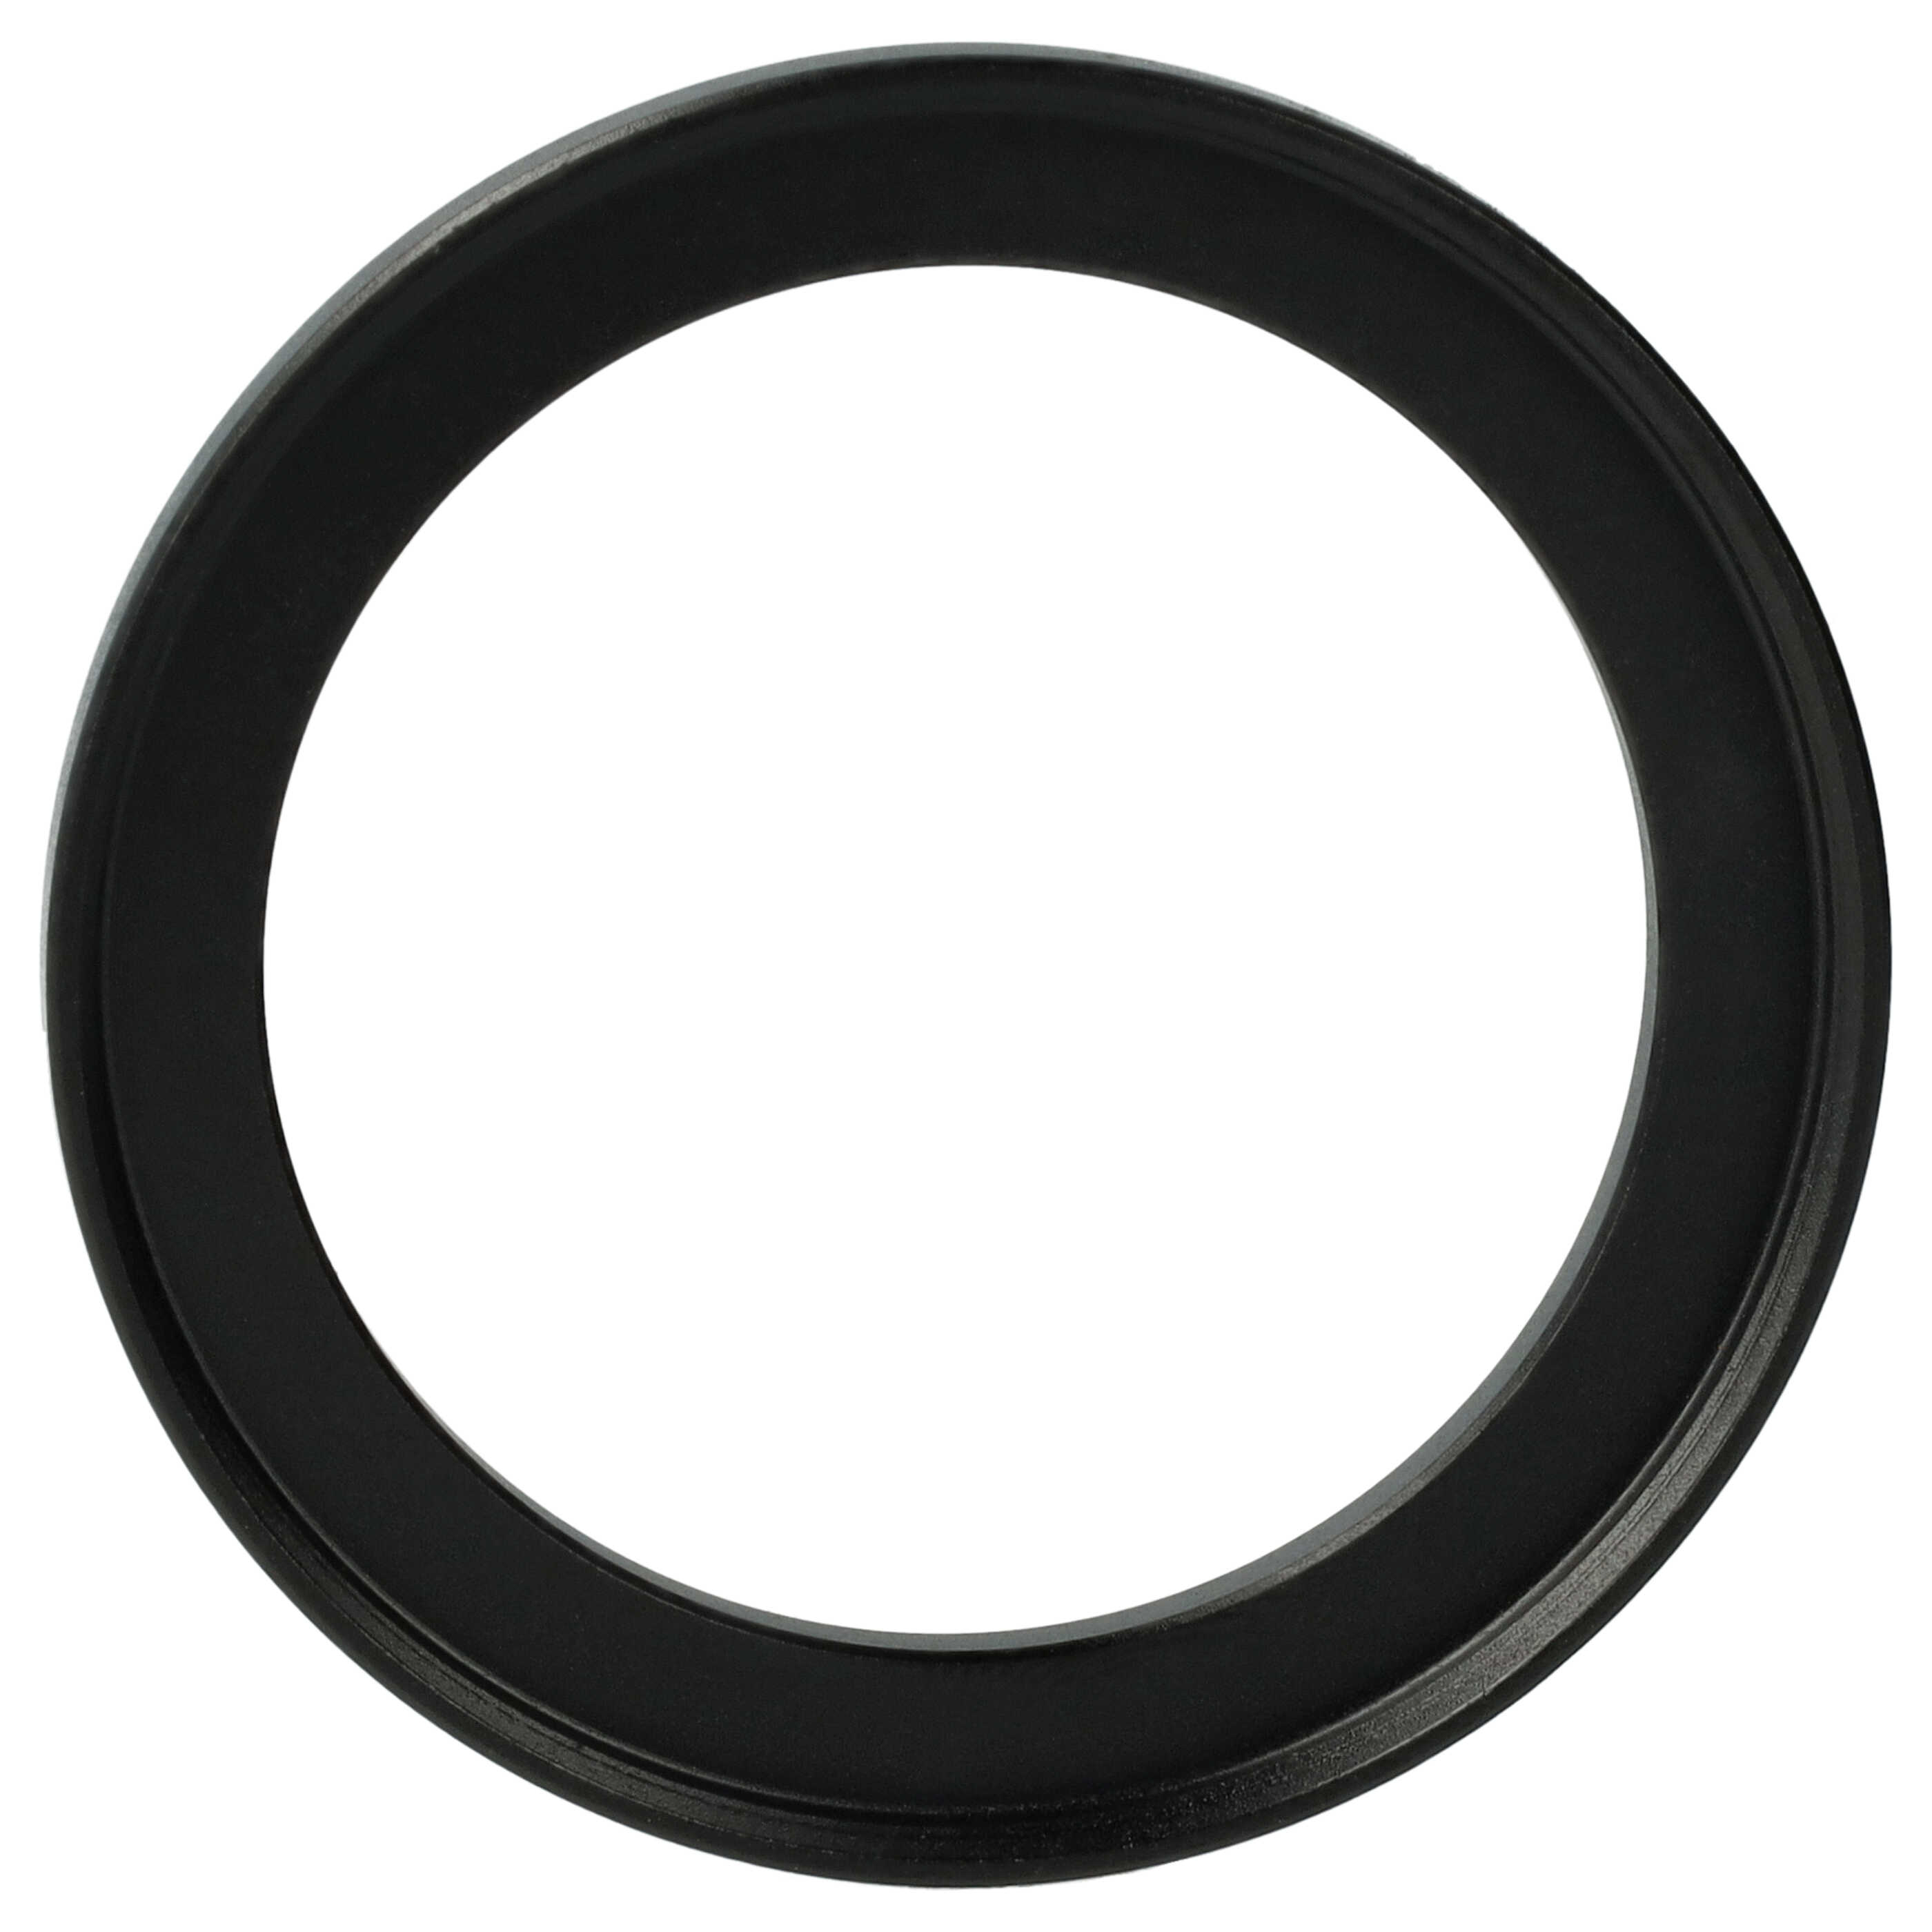 Step-Up Ring Adapter of 39 mm to 46 mmfor various Camera Lens - Filter Adapter